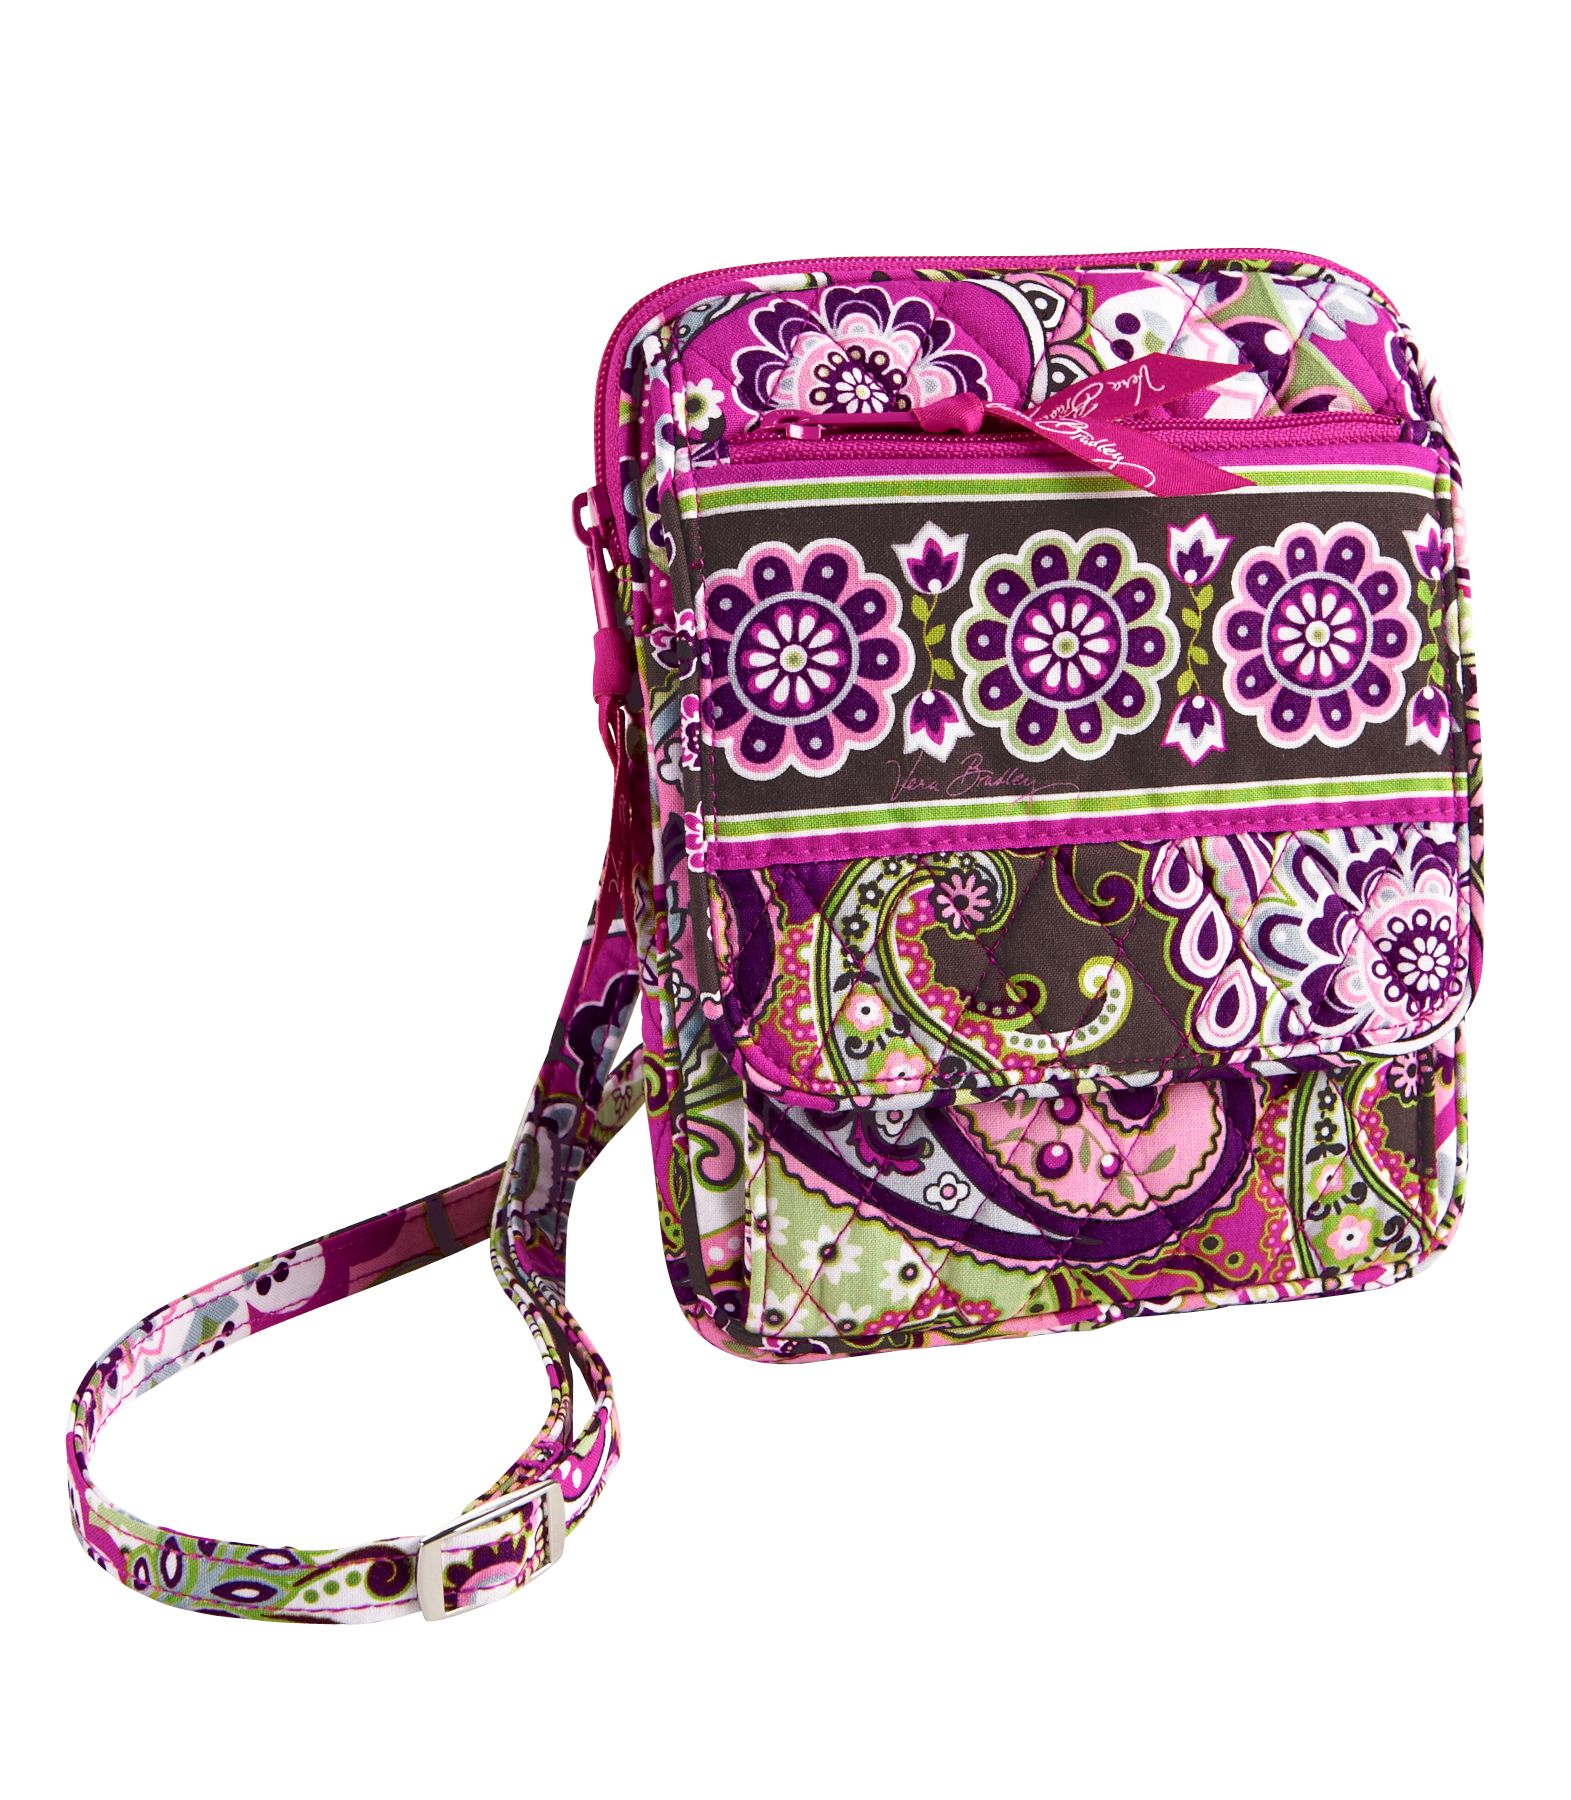 TODAY ONLY, EXTRA 30% off at Vera Bradley